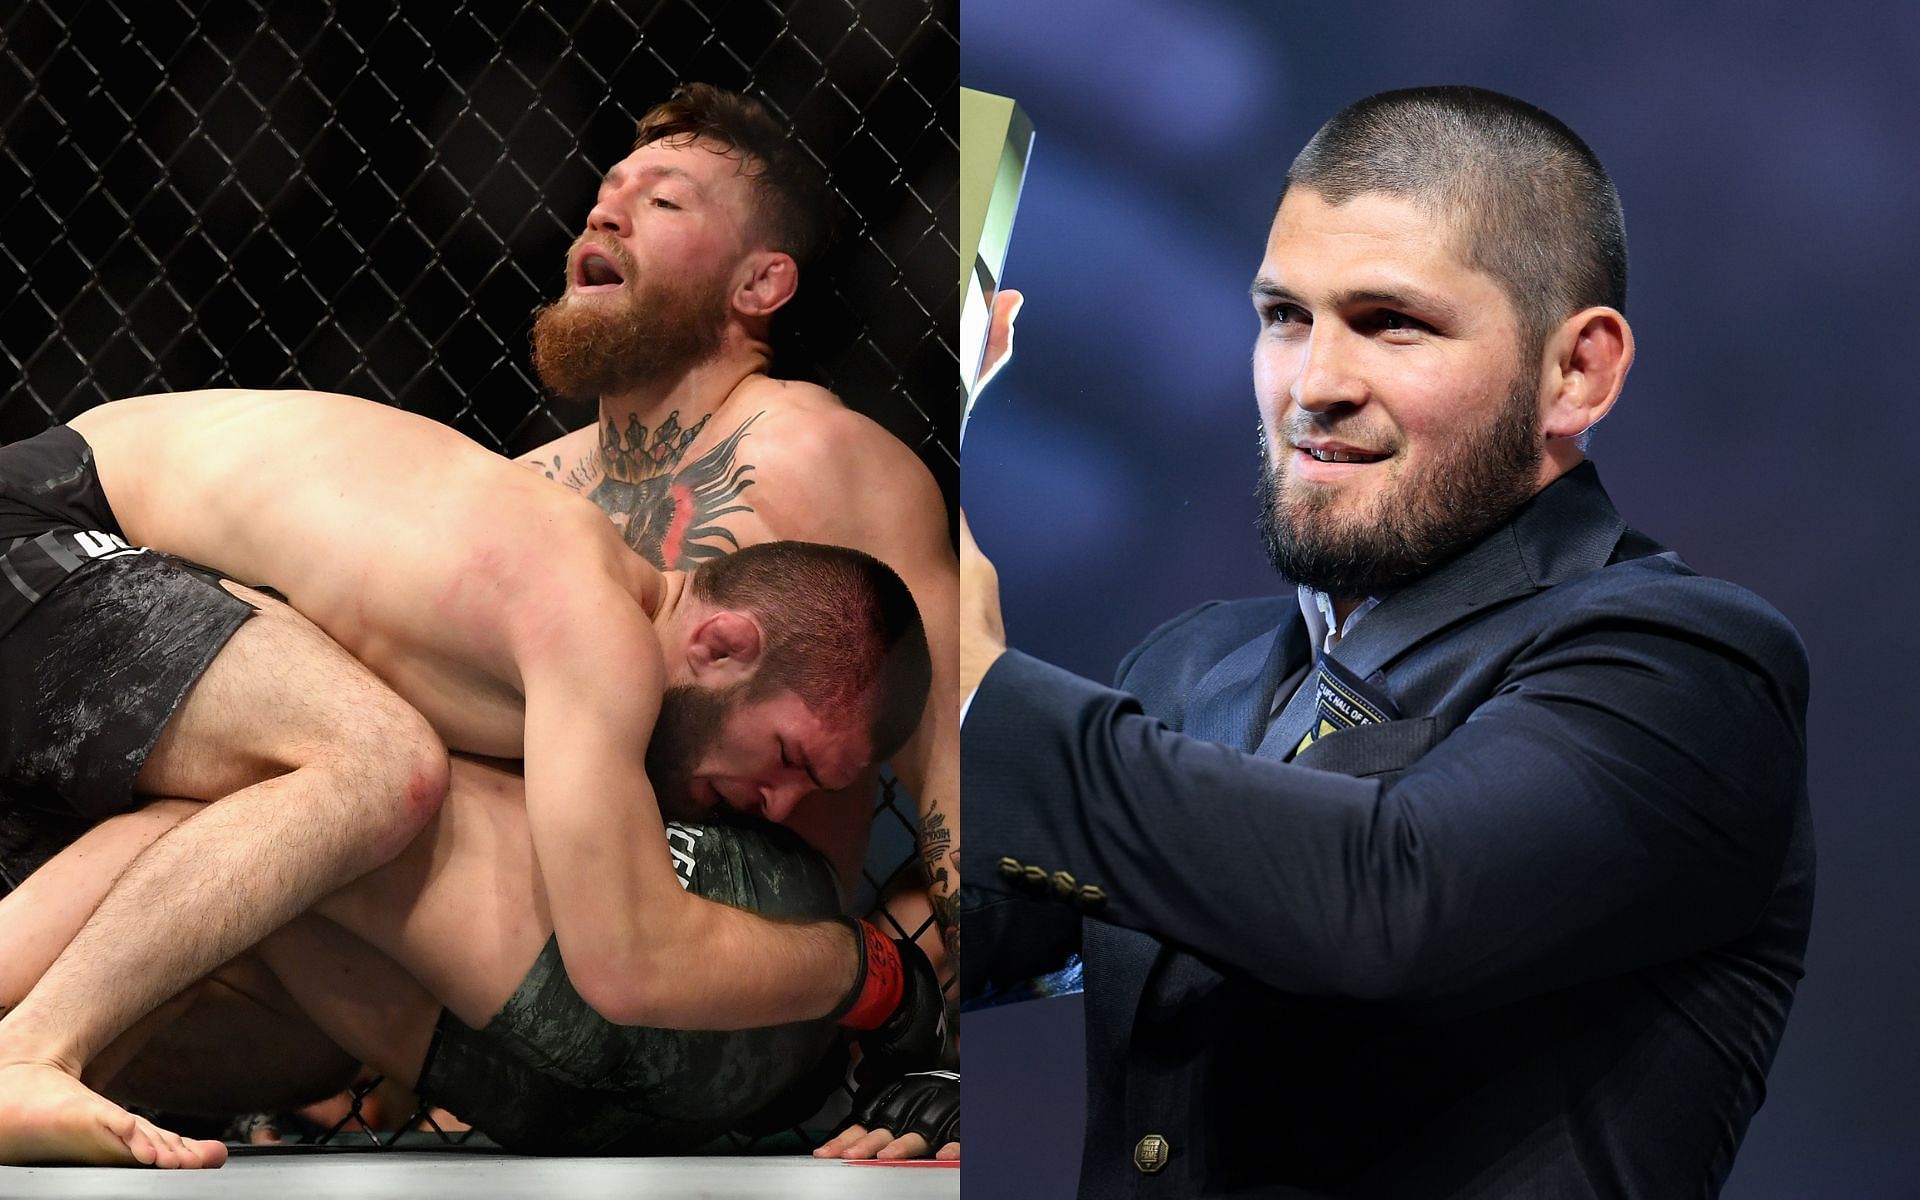 Khabib Nurmagomedov utilized his Sambo and grappling skills to tire Conor McGregor out en route to a submission win (Left); Nurmagomedov was inducted into the UFC Hall of Fame in 2022 (Right)